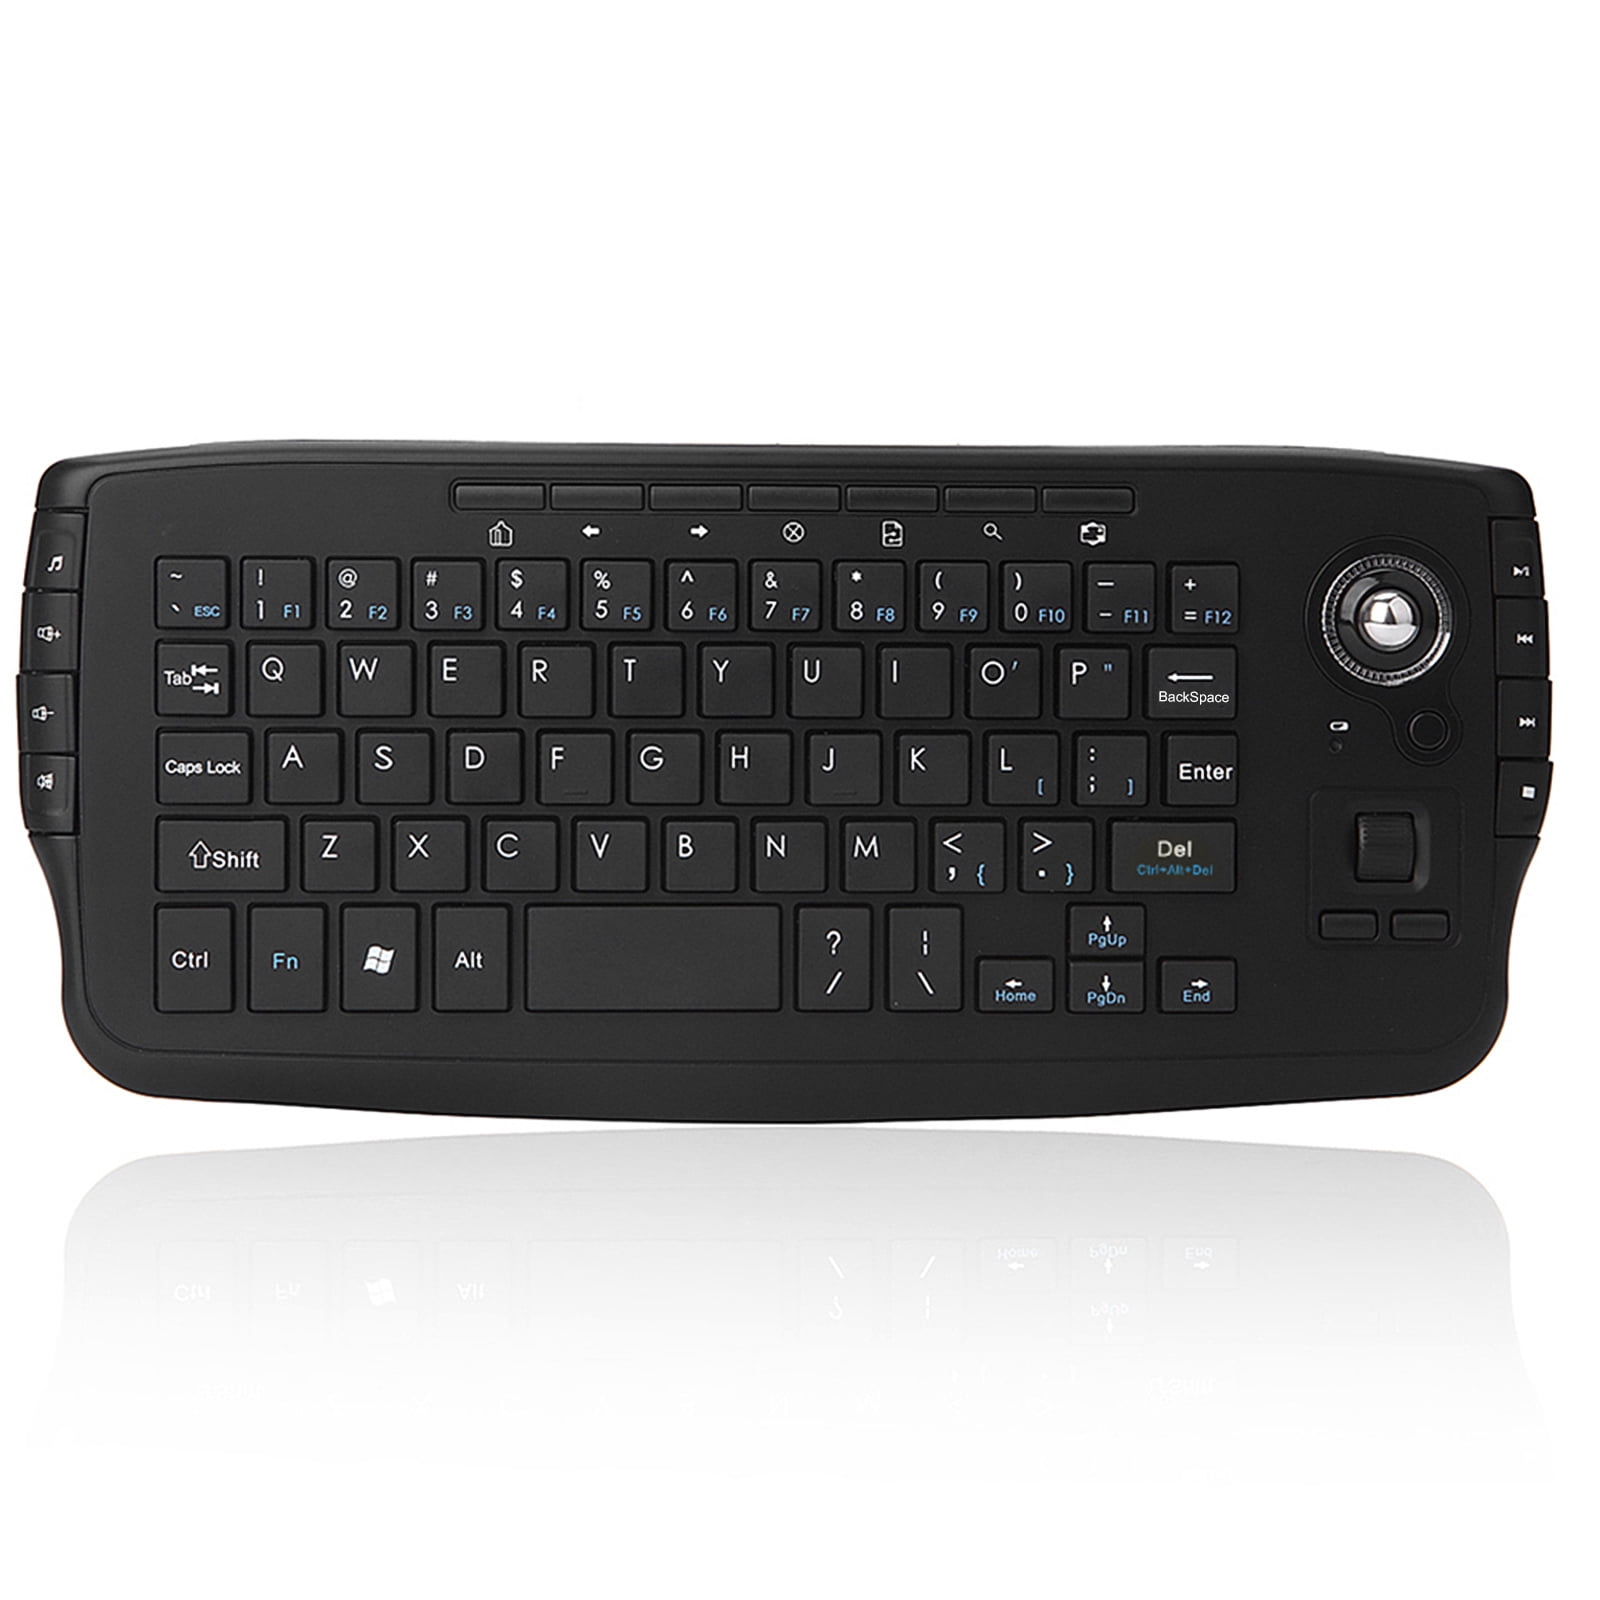 E30 2.4GHz Wireless with Trackball Mouse Scroll Wheel Remote Control for Android Smart TV PC Notebook Black - Walmart.com